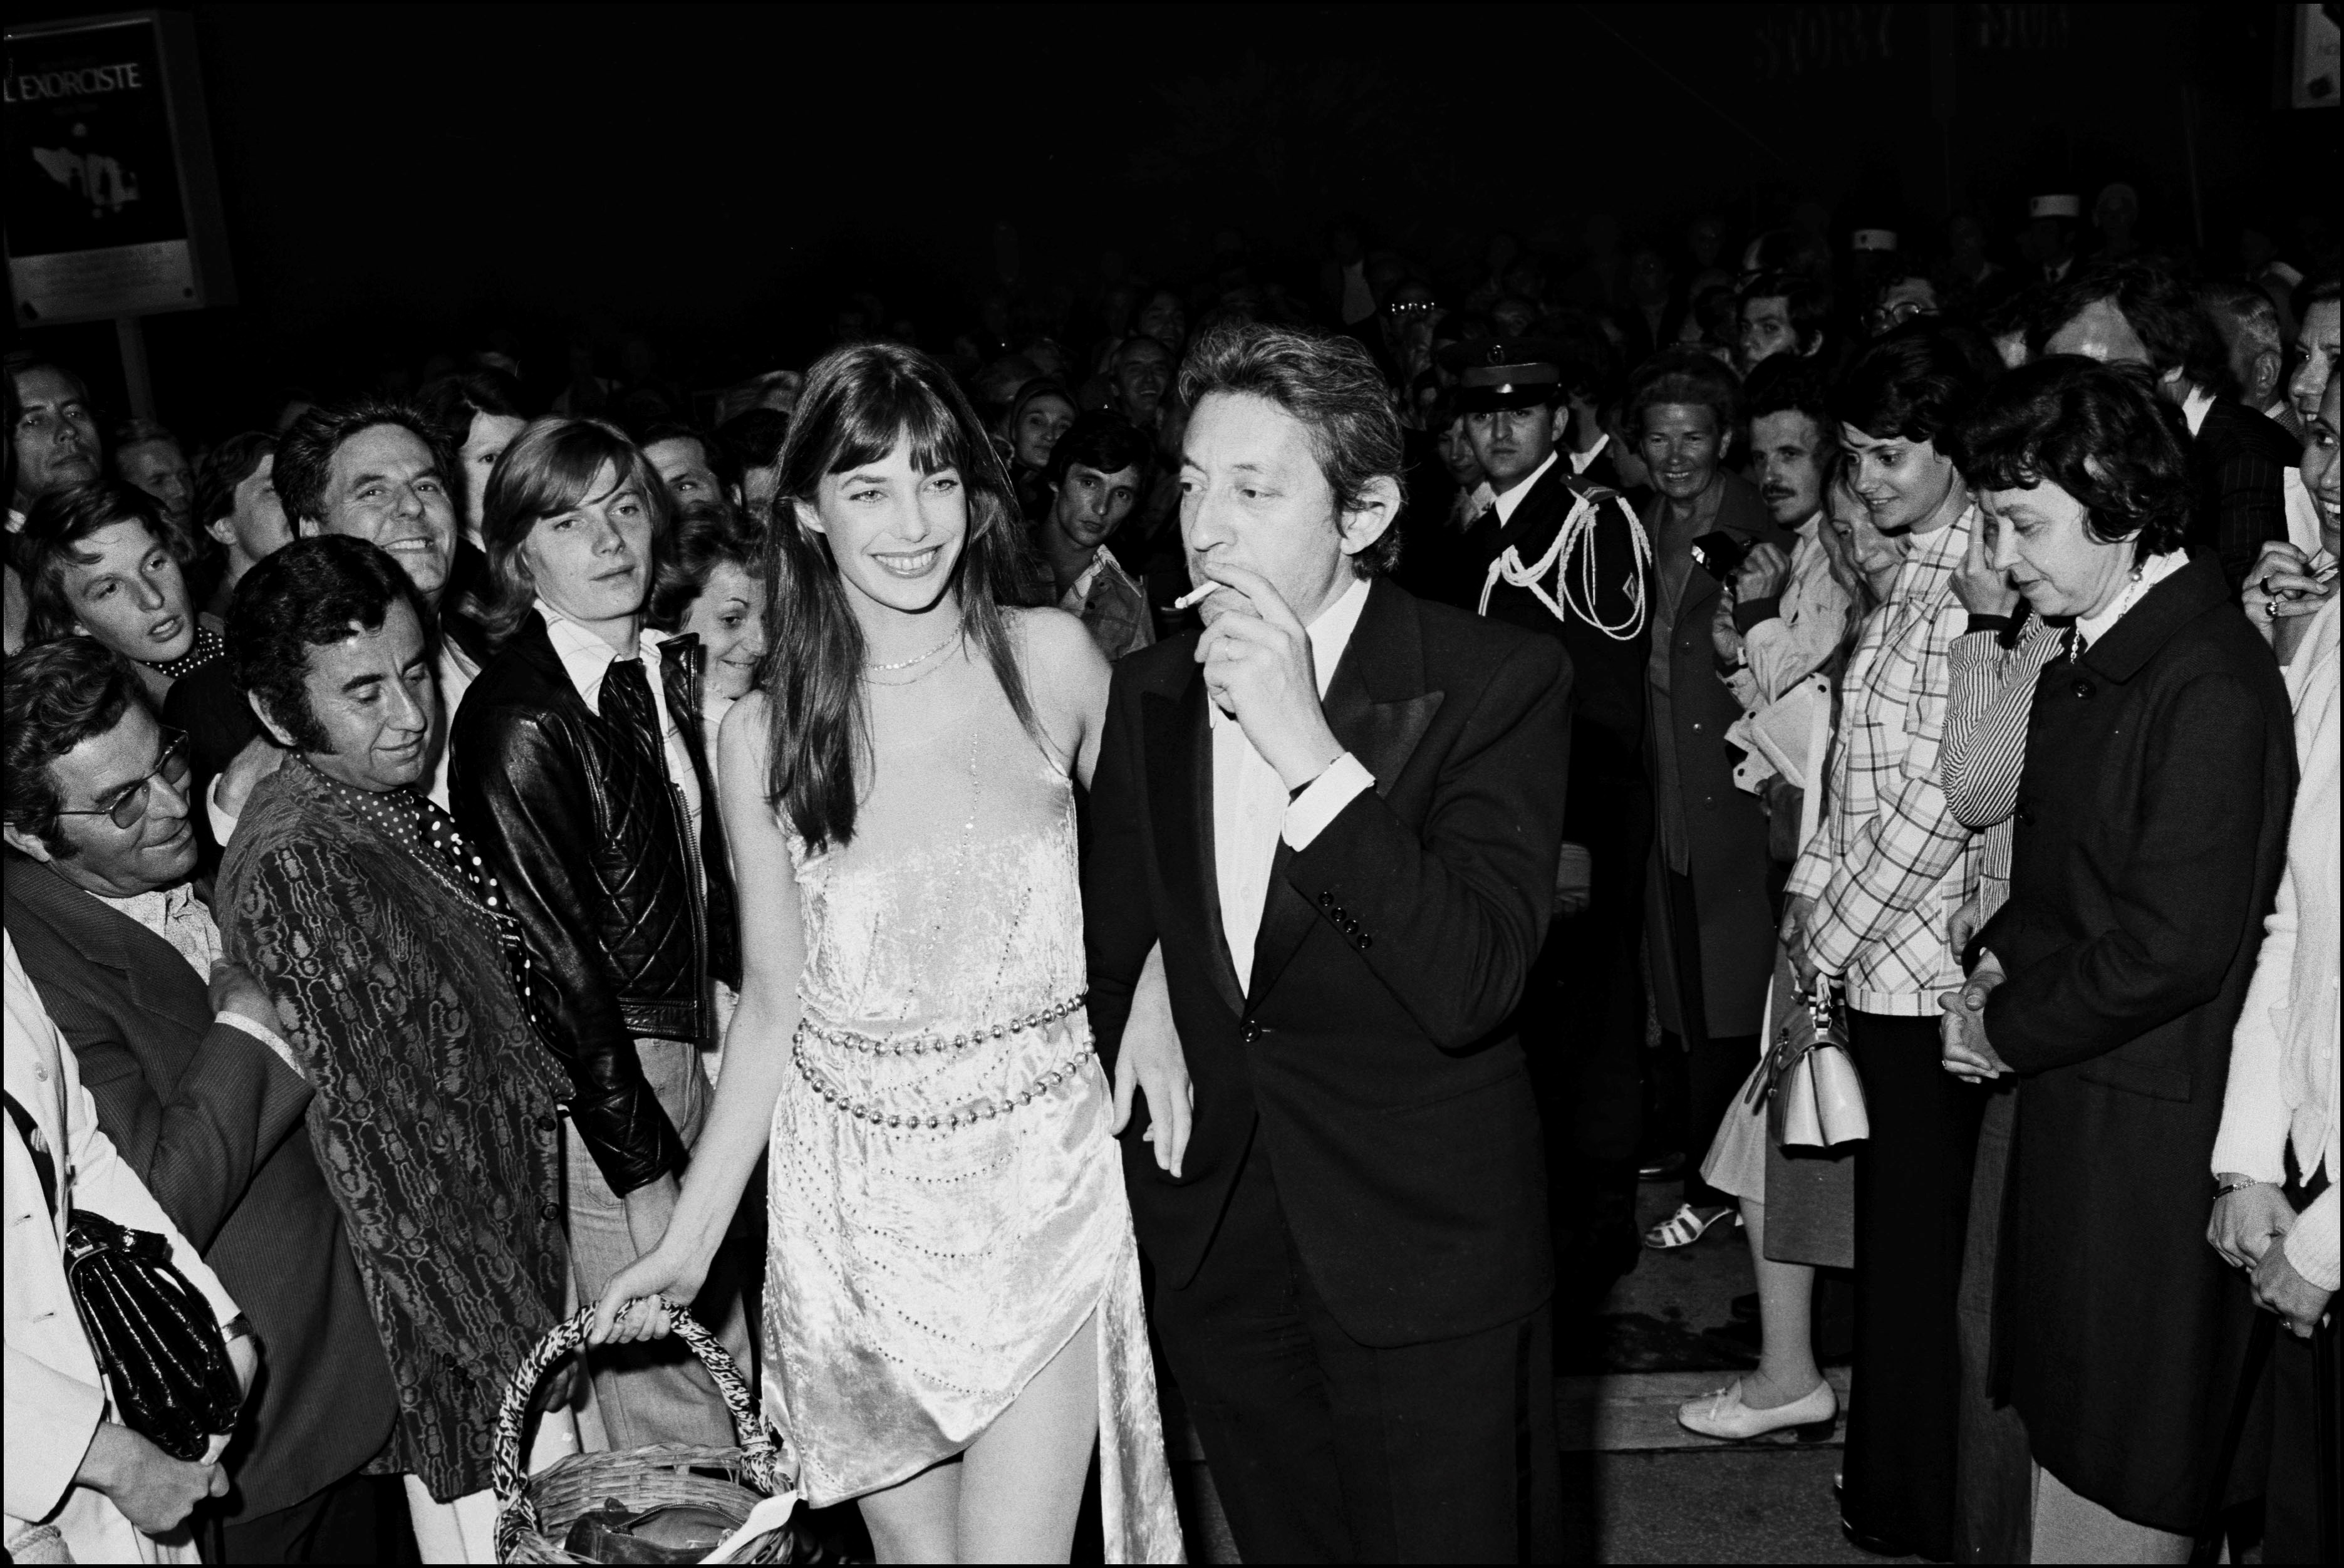 FRANCE - MAY 01:  Serge Gainsbourg, Jane Birkin at Cannes film festival in Cannes, France in May, 1974.  (Photo by Michel GINFRAY/Gamma-Rapho via Getty Images) (Foto: Gamma-Rapho via Getty Images)